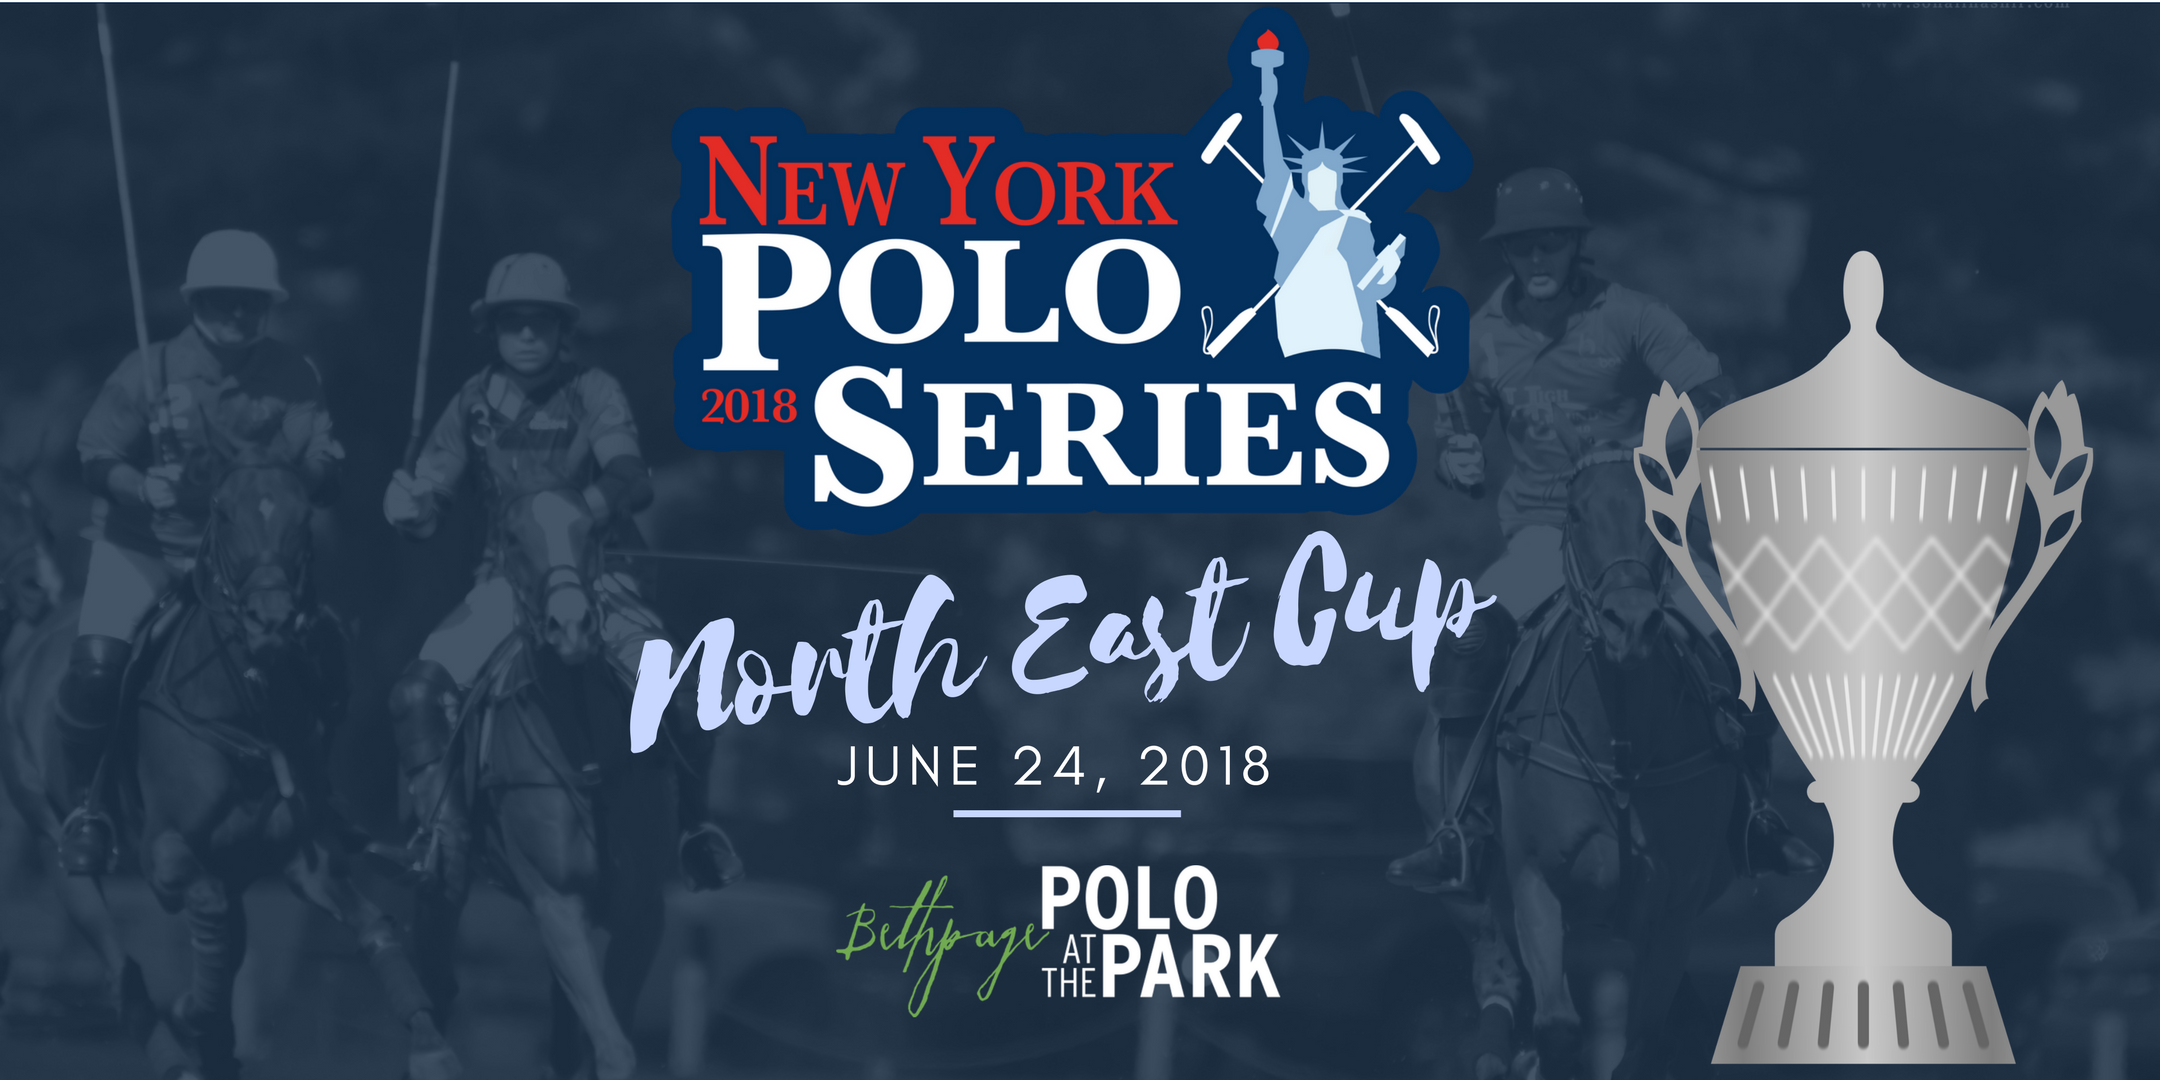 New York Polo Series (6/24 North East Cup)